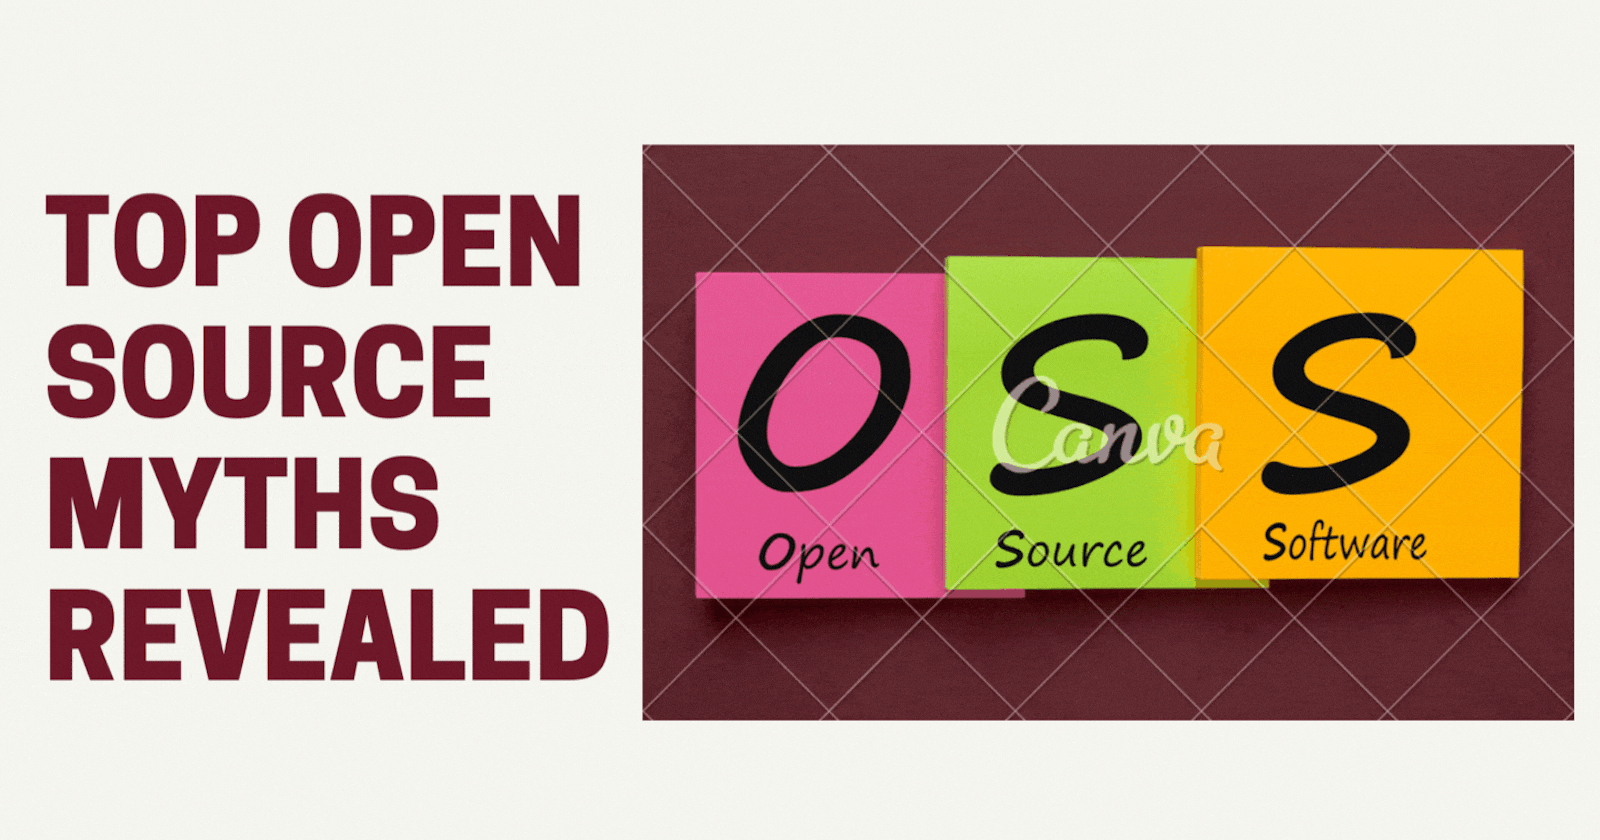 Top Open Source Myths Revealed